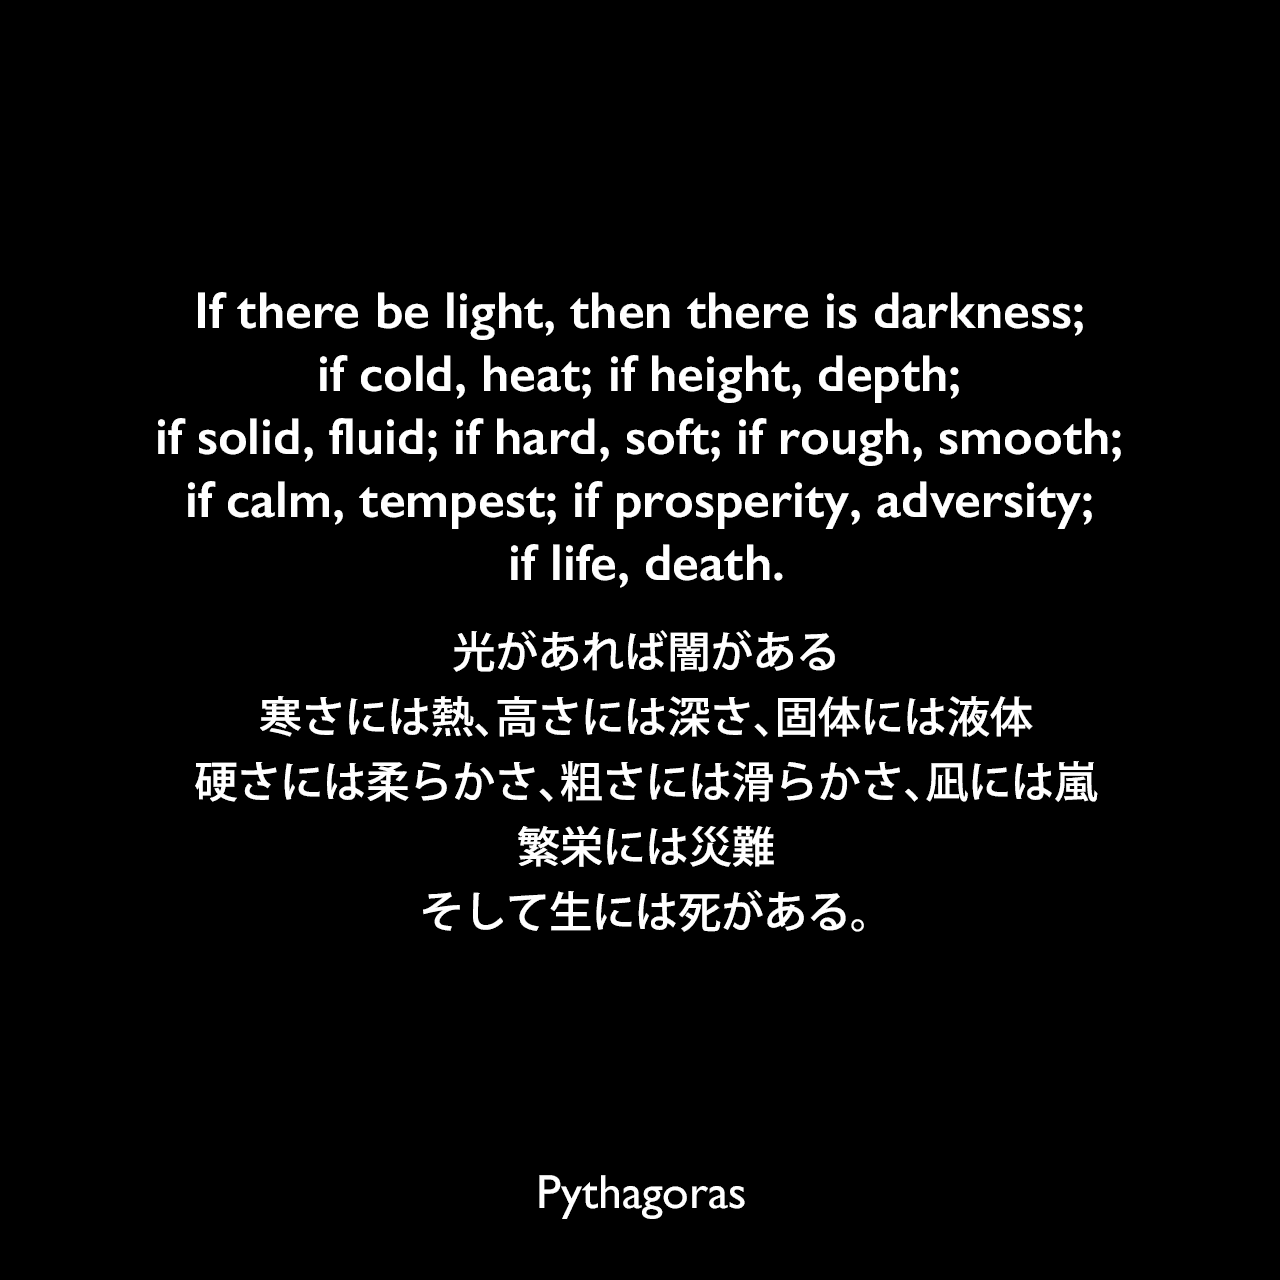 If there be light, then there is darkness; if cold, heat; if height, depth; if solid, fluid; if hard, soft; if rough, smooth; if calm, tempest; if prosperity, adversity; if life, death.光があれば闇がある、寒さには熱、高さには深さ、固体には液体、硬さには柔らかさ、粗さには滑らかさ、凪には嵐、繁栄には災難、そして生には死がある。- 「Bibliotheca Sacra and Theological Review」よりPythagoras